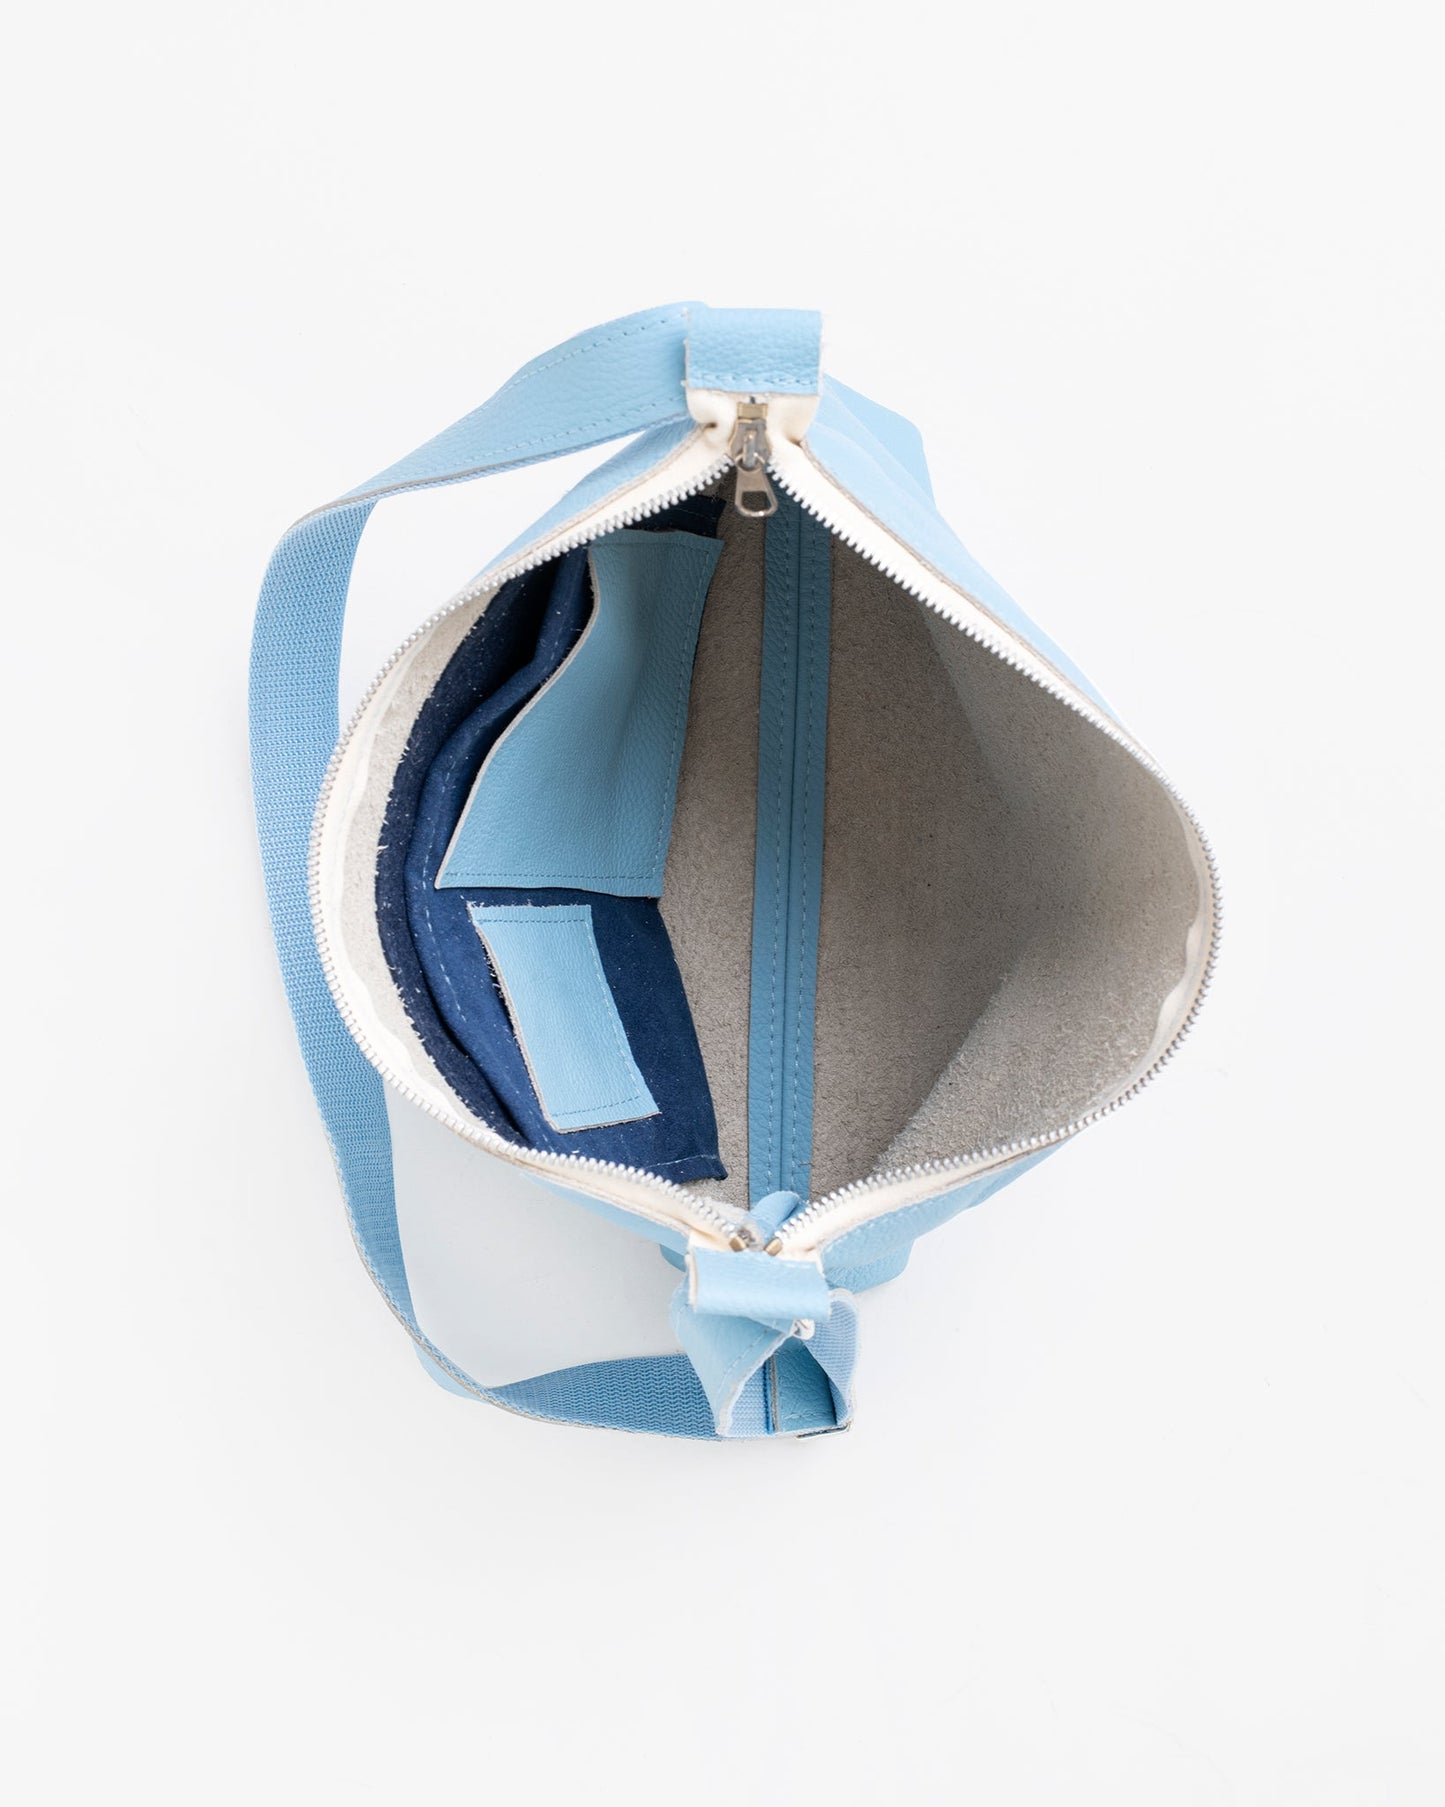 Handmade Anet L shoulder bag crafted from blue and white leather remnants, showcasing unique textures and eco-friendly design from Trendbag in Estonia.